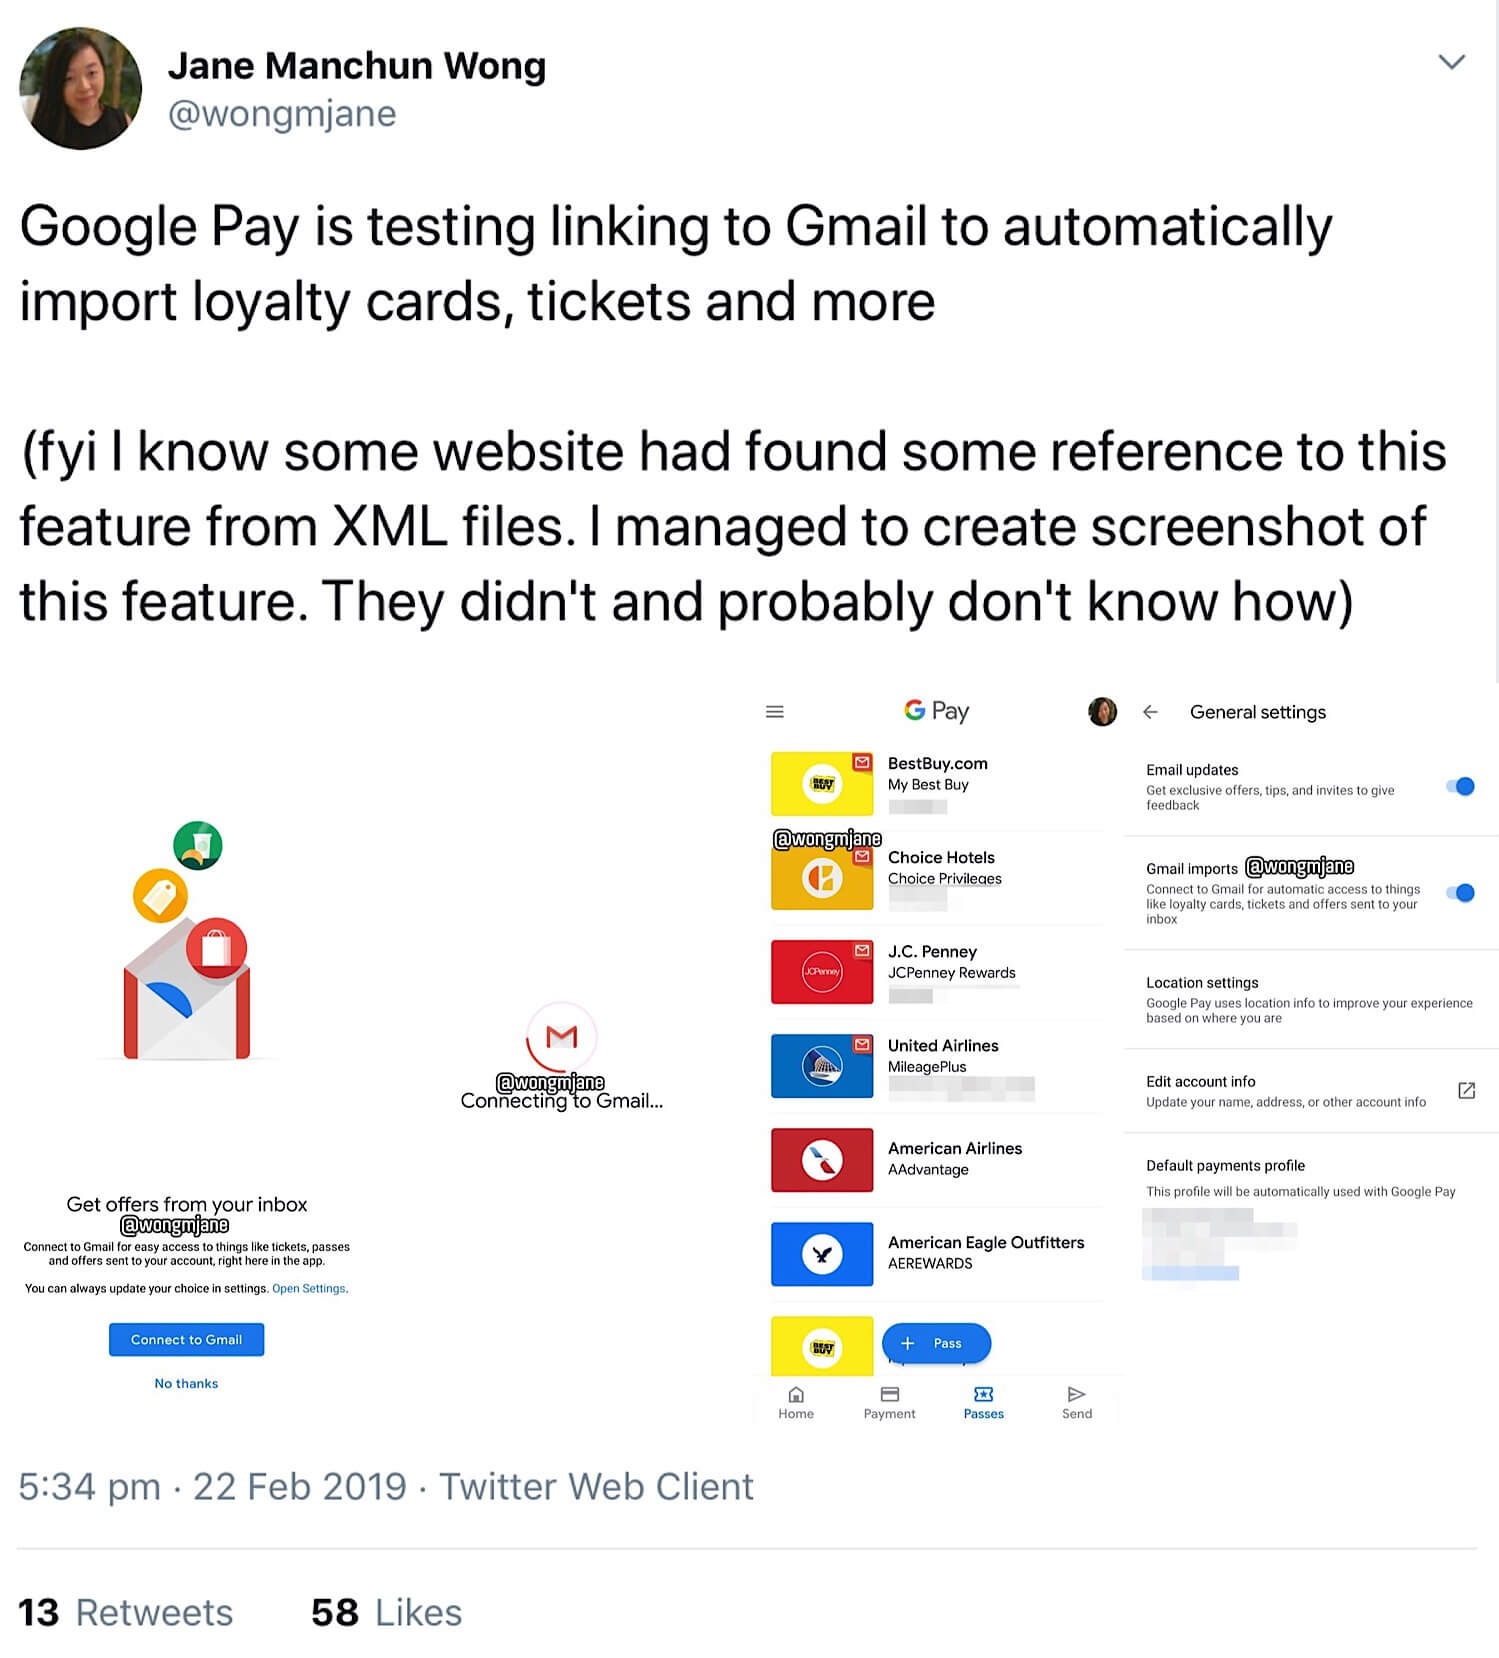 Early screenshots of Google Pay’s upcoming Gmail integration which will scan Gmail for loyalty cards, passes, tickets, and other offers.